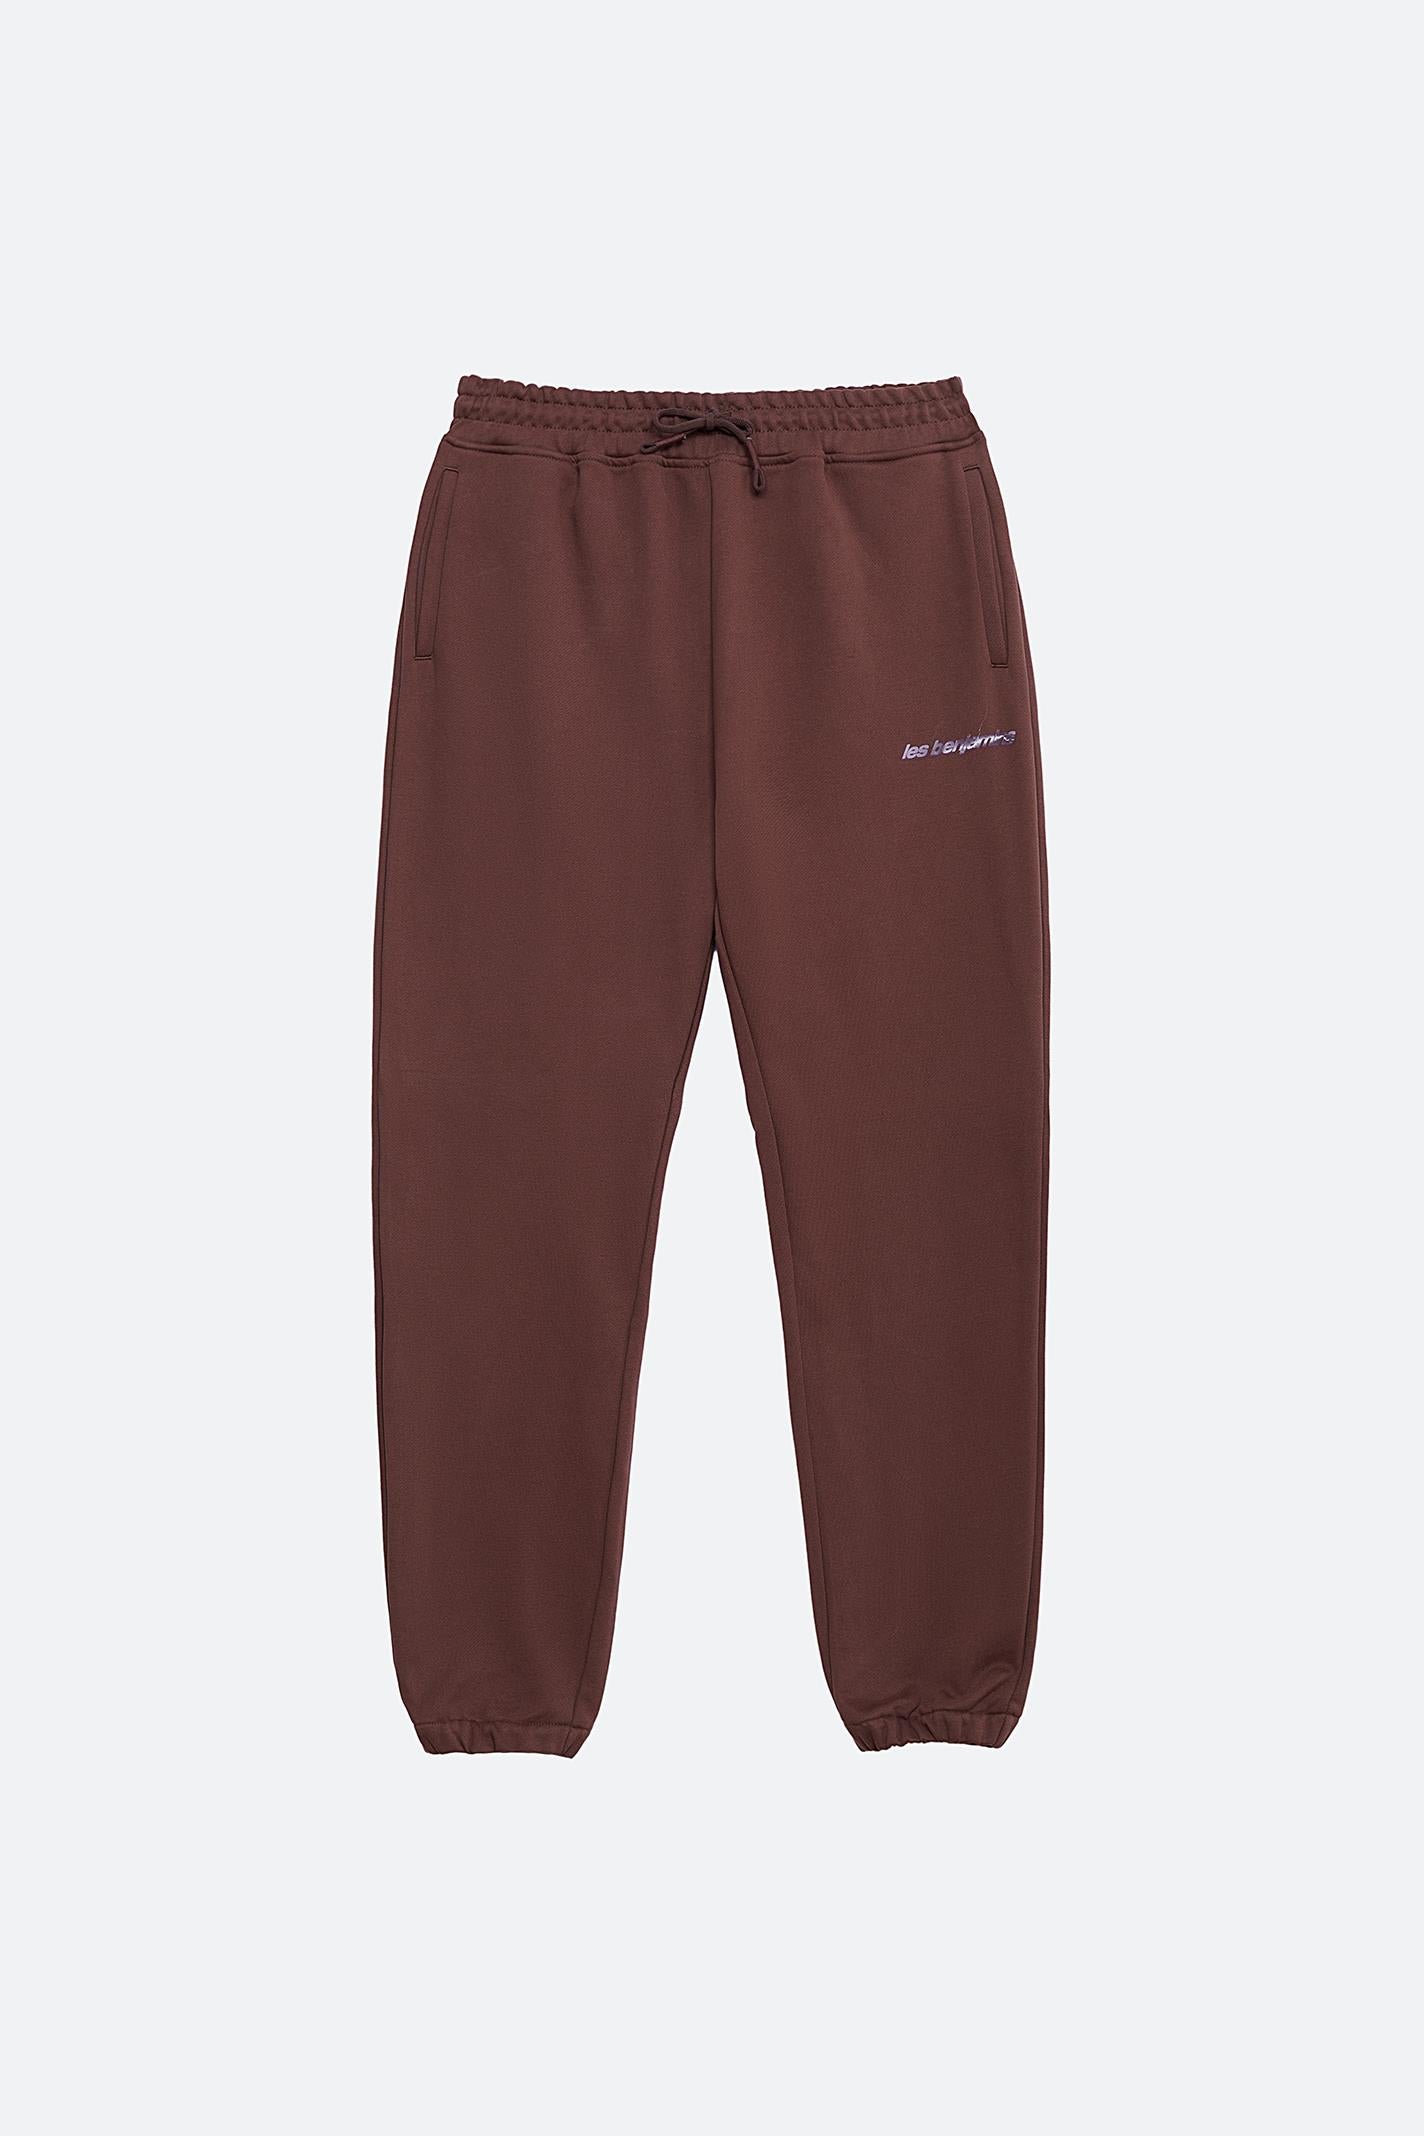 RELAXED SWEATPANT 012 